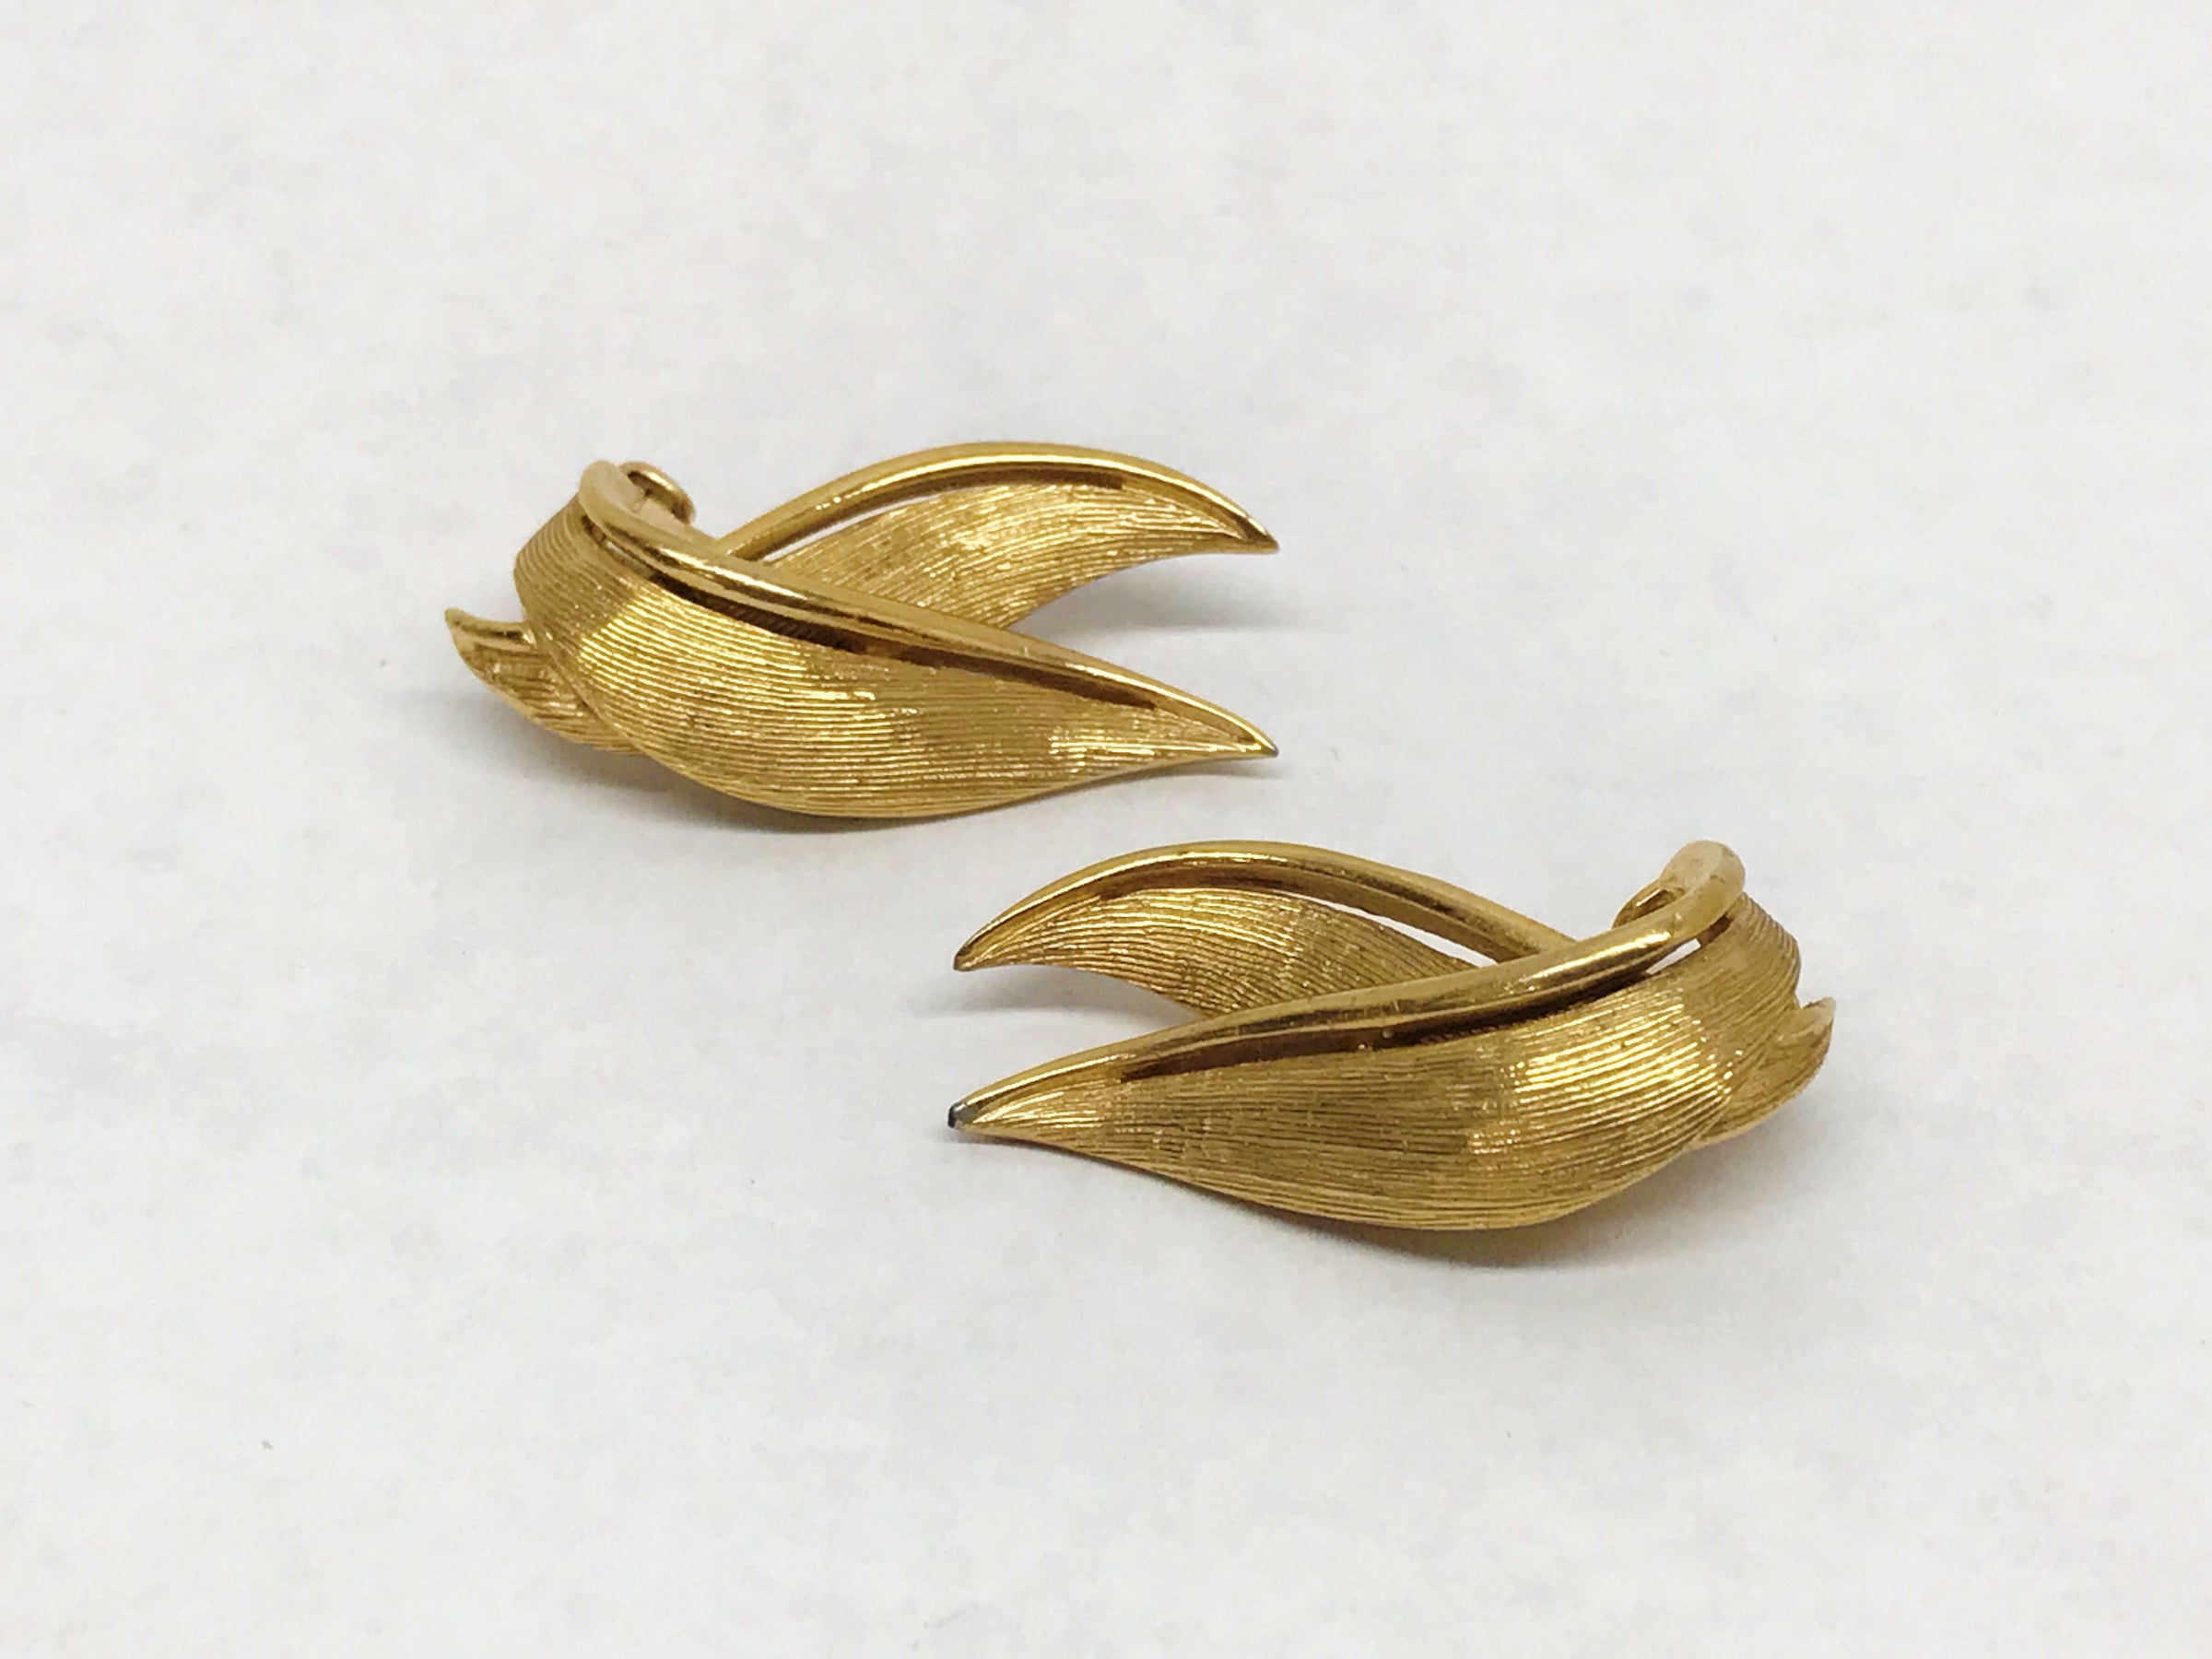 www.hersandhistreasures.com/products/1955-1971-marcel-boucher-gold-tone-clip-on-earrings